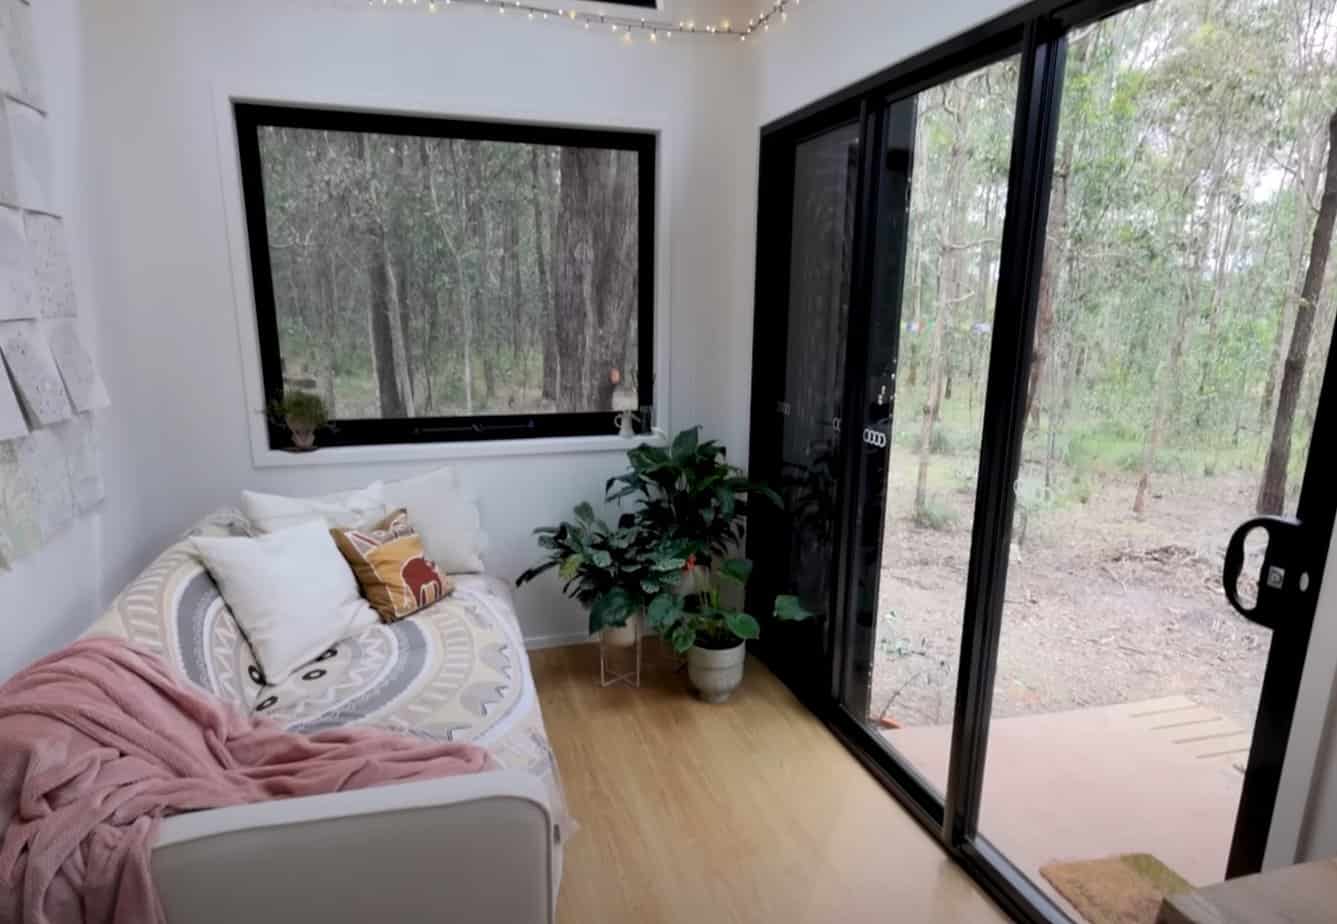 The tiny house's living room has nice couch and amazing view of the woods from its huge windows.